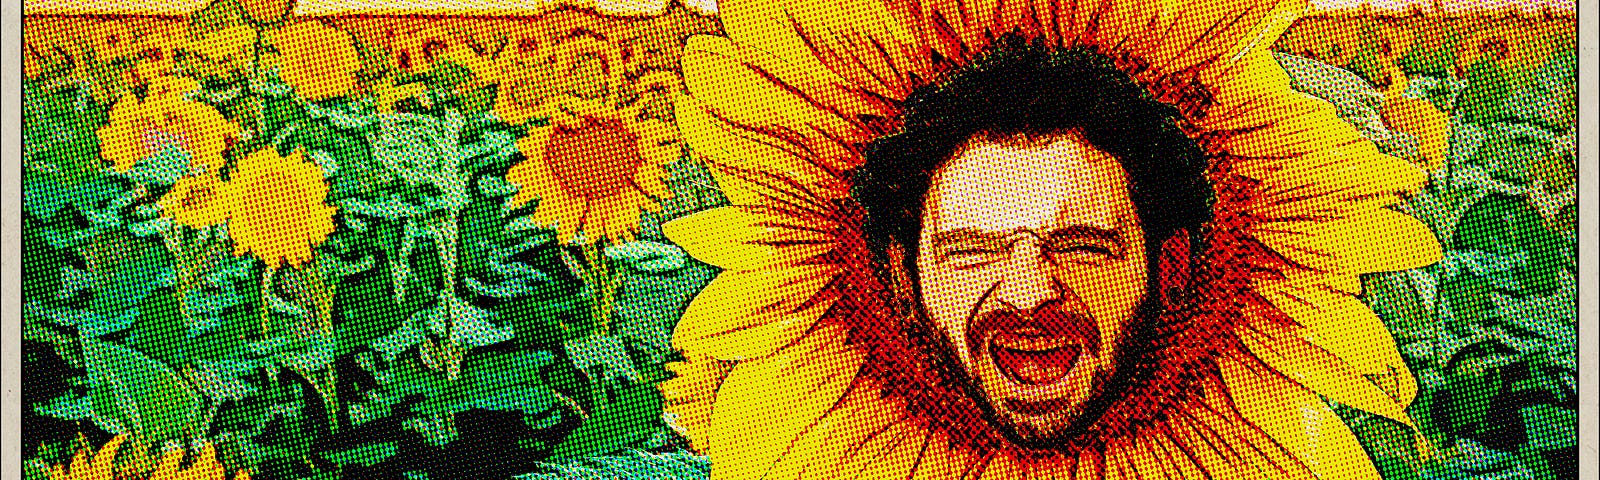 Man screaming from sunflower